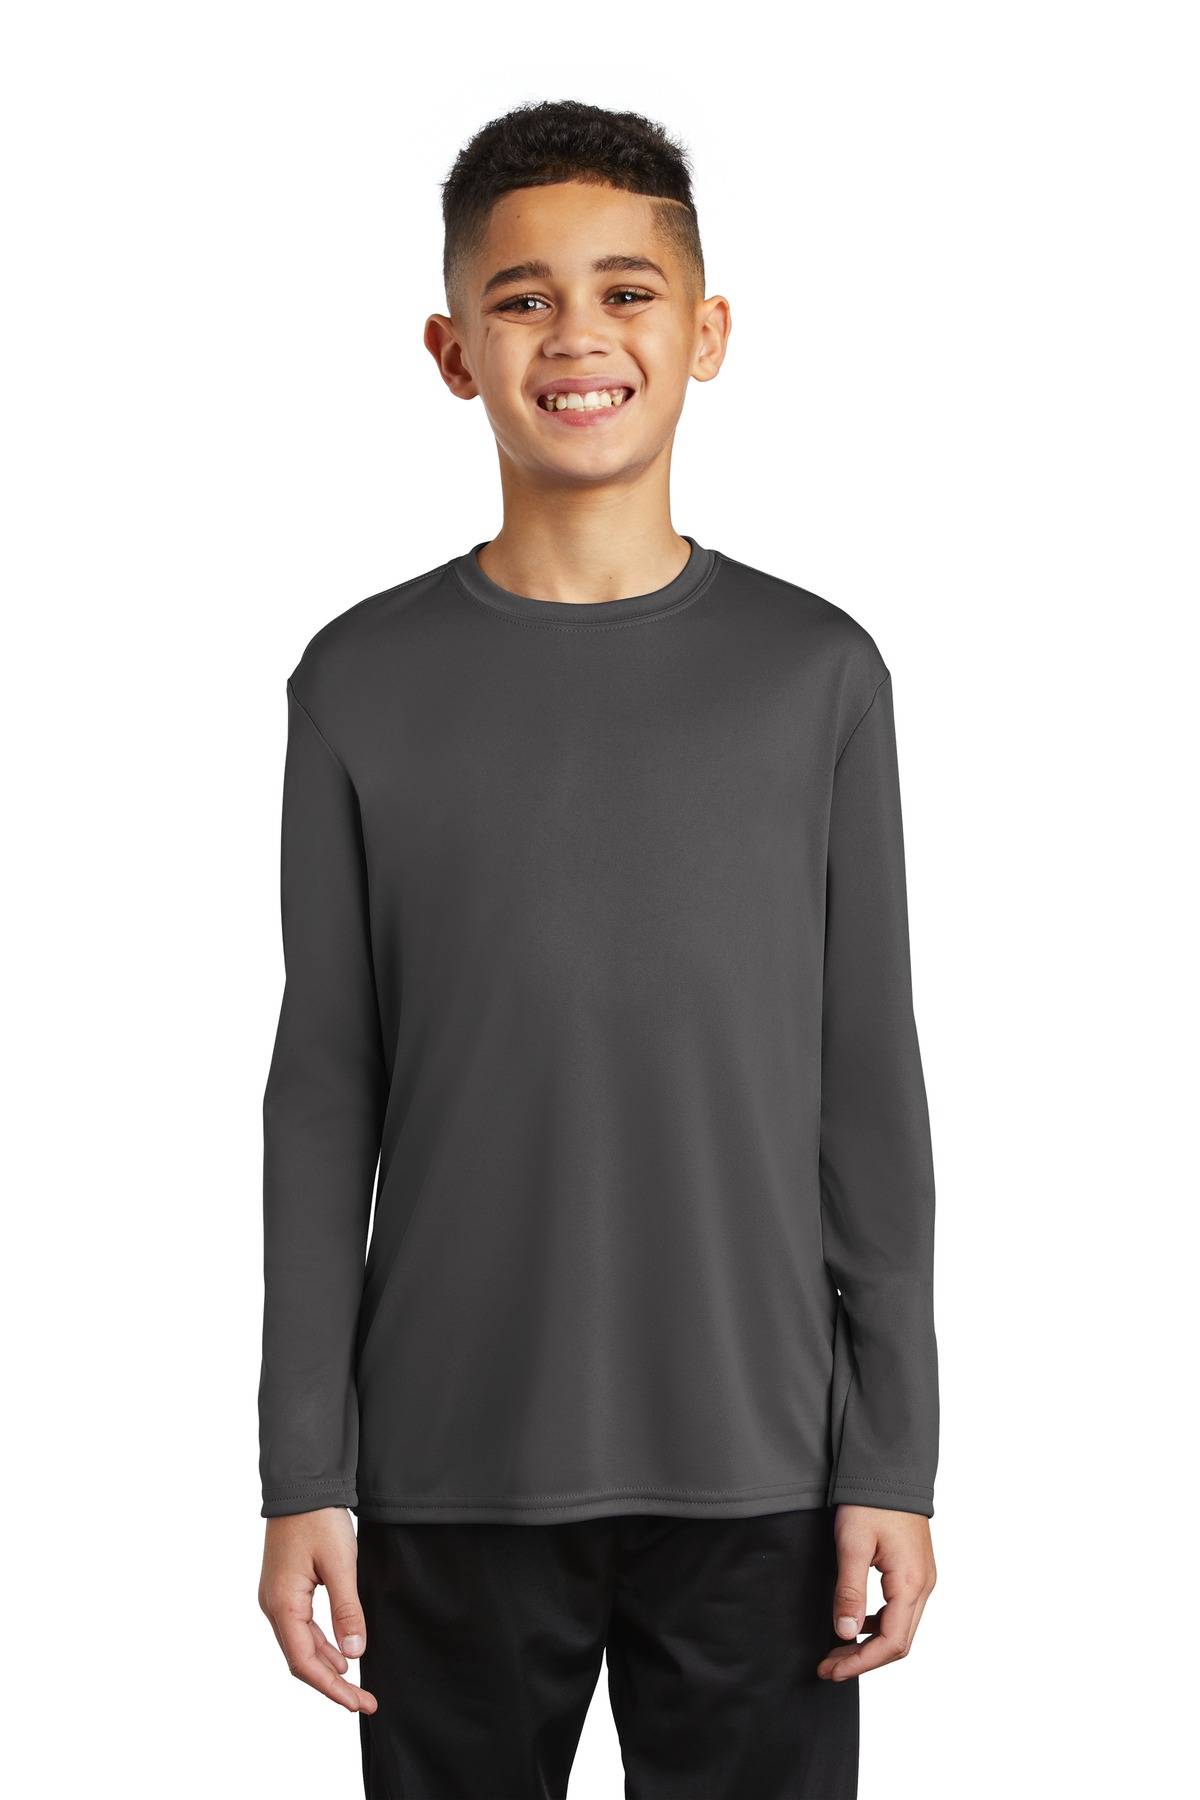 Port & Company Youth Long Sleeve Performance Tee PC380YLS in Bulk Price